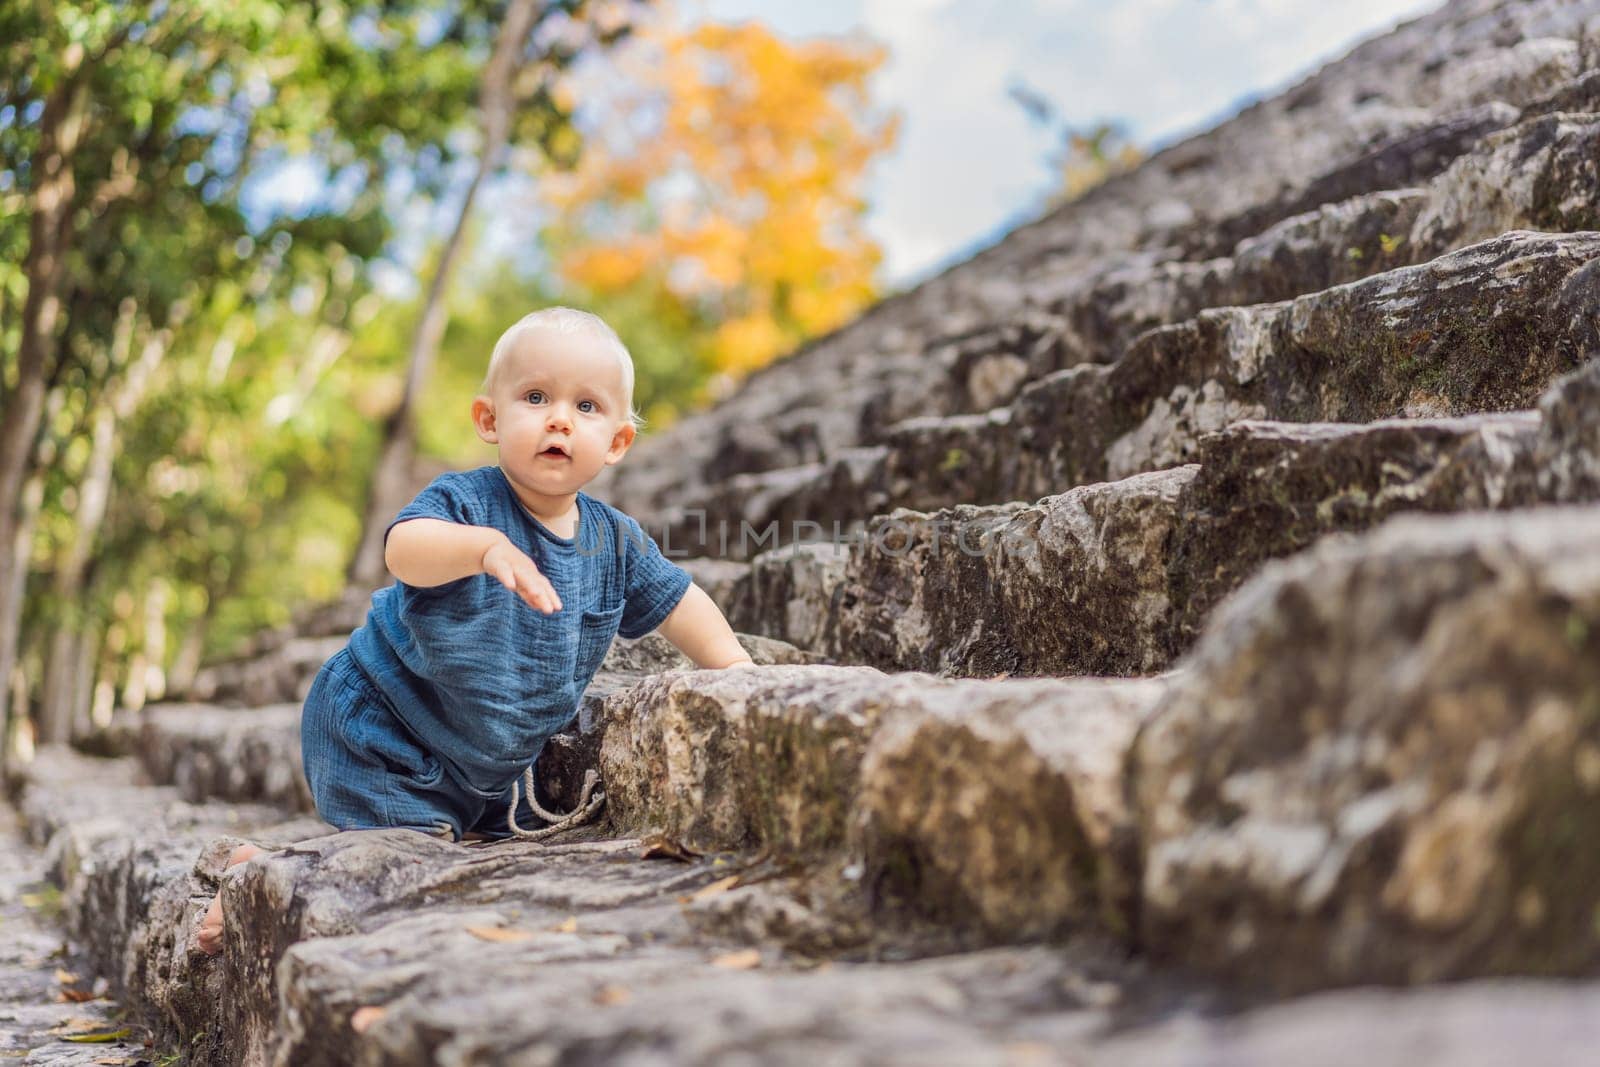 Baby tourist at Coba, Mexico. Ancient mayan city in Mexico. Coba is an archaeological area and a famous landmark of Yucatan Peninsula. Cloudy sky over a pyramid in Mexico by galitskaya